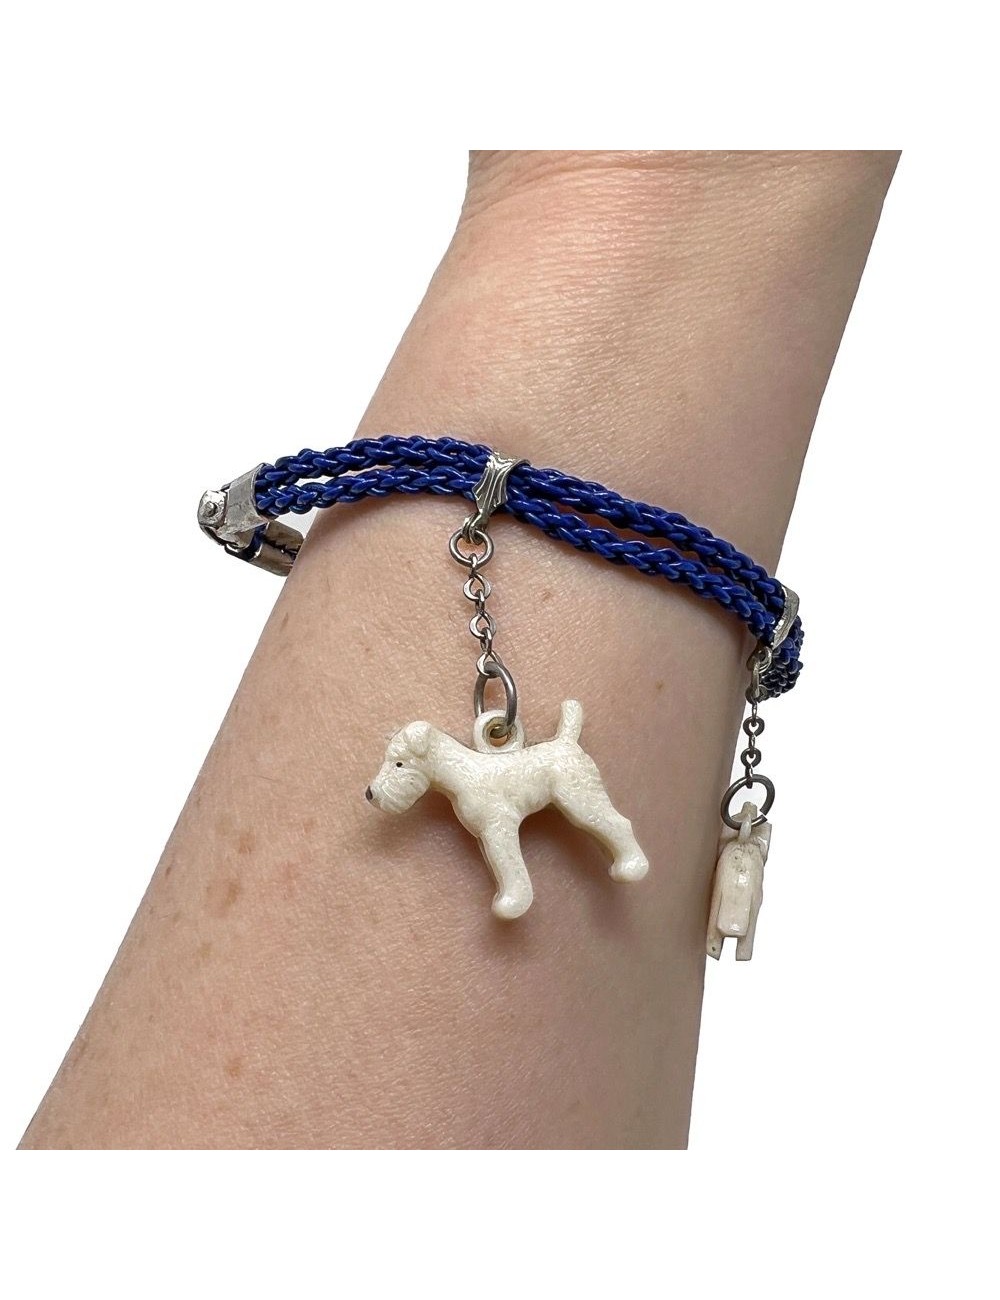 Marc Jacobs Whimsical Animal Charm Bracelet Made In Italy Deer Fox Cow  Turtle | eBay